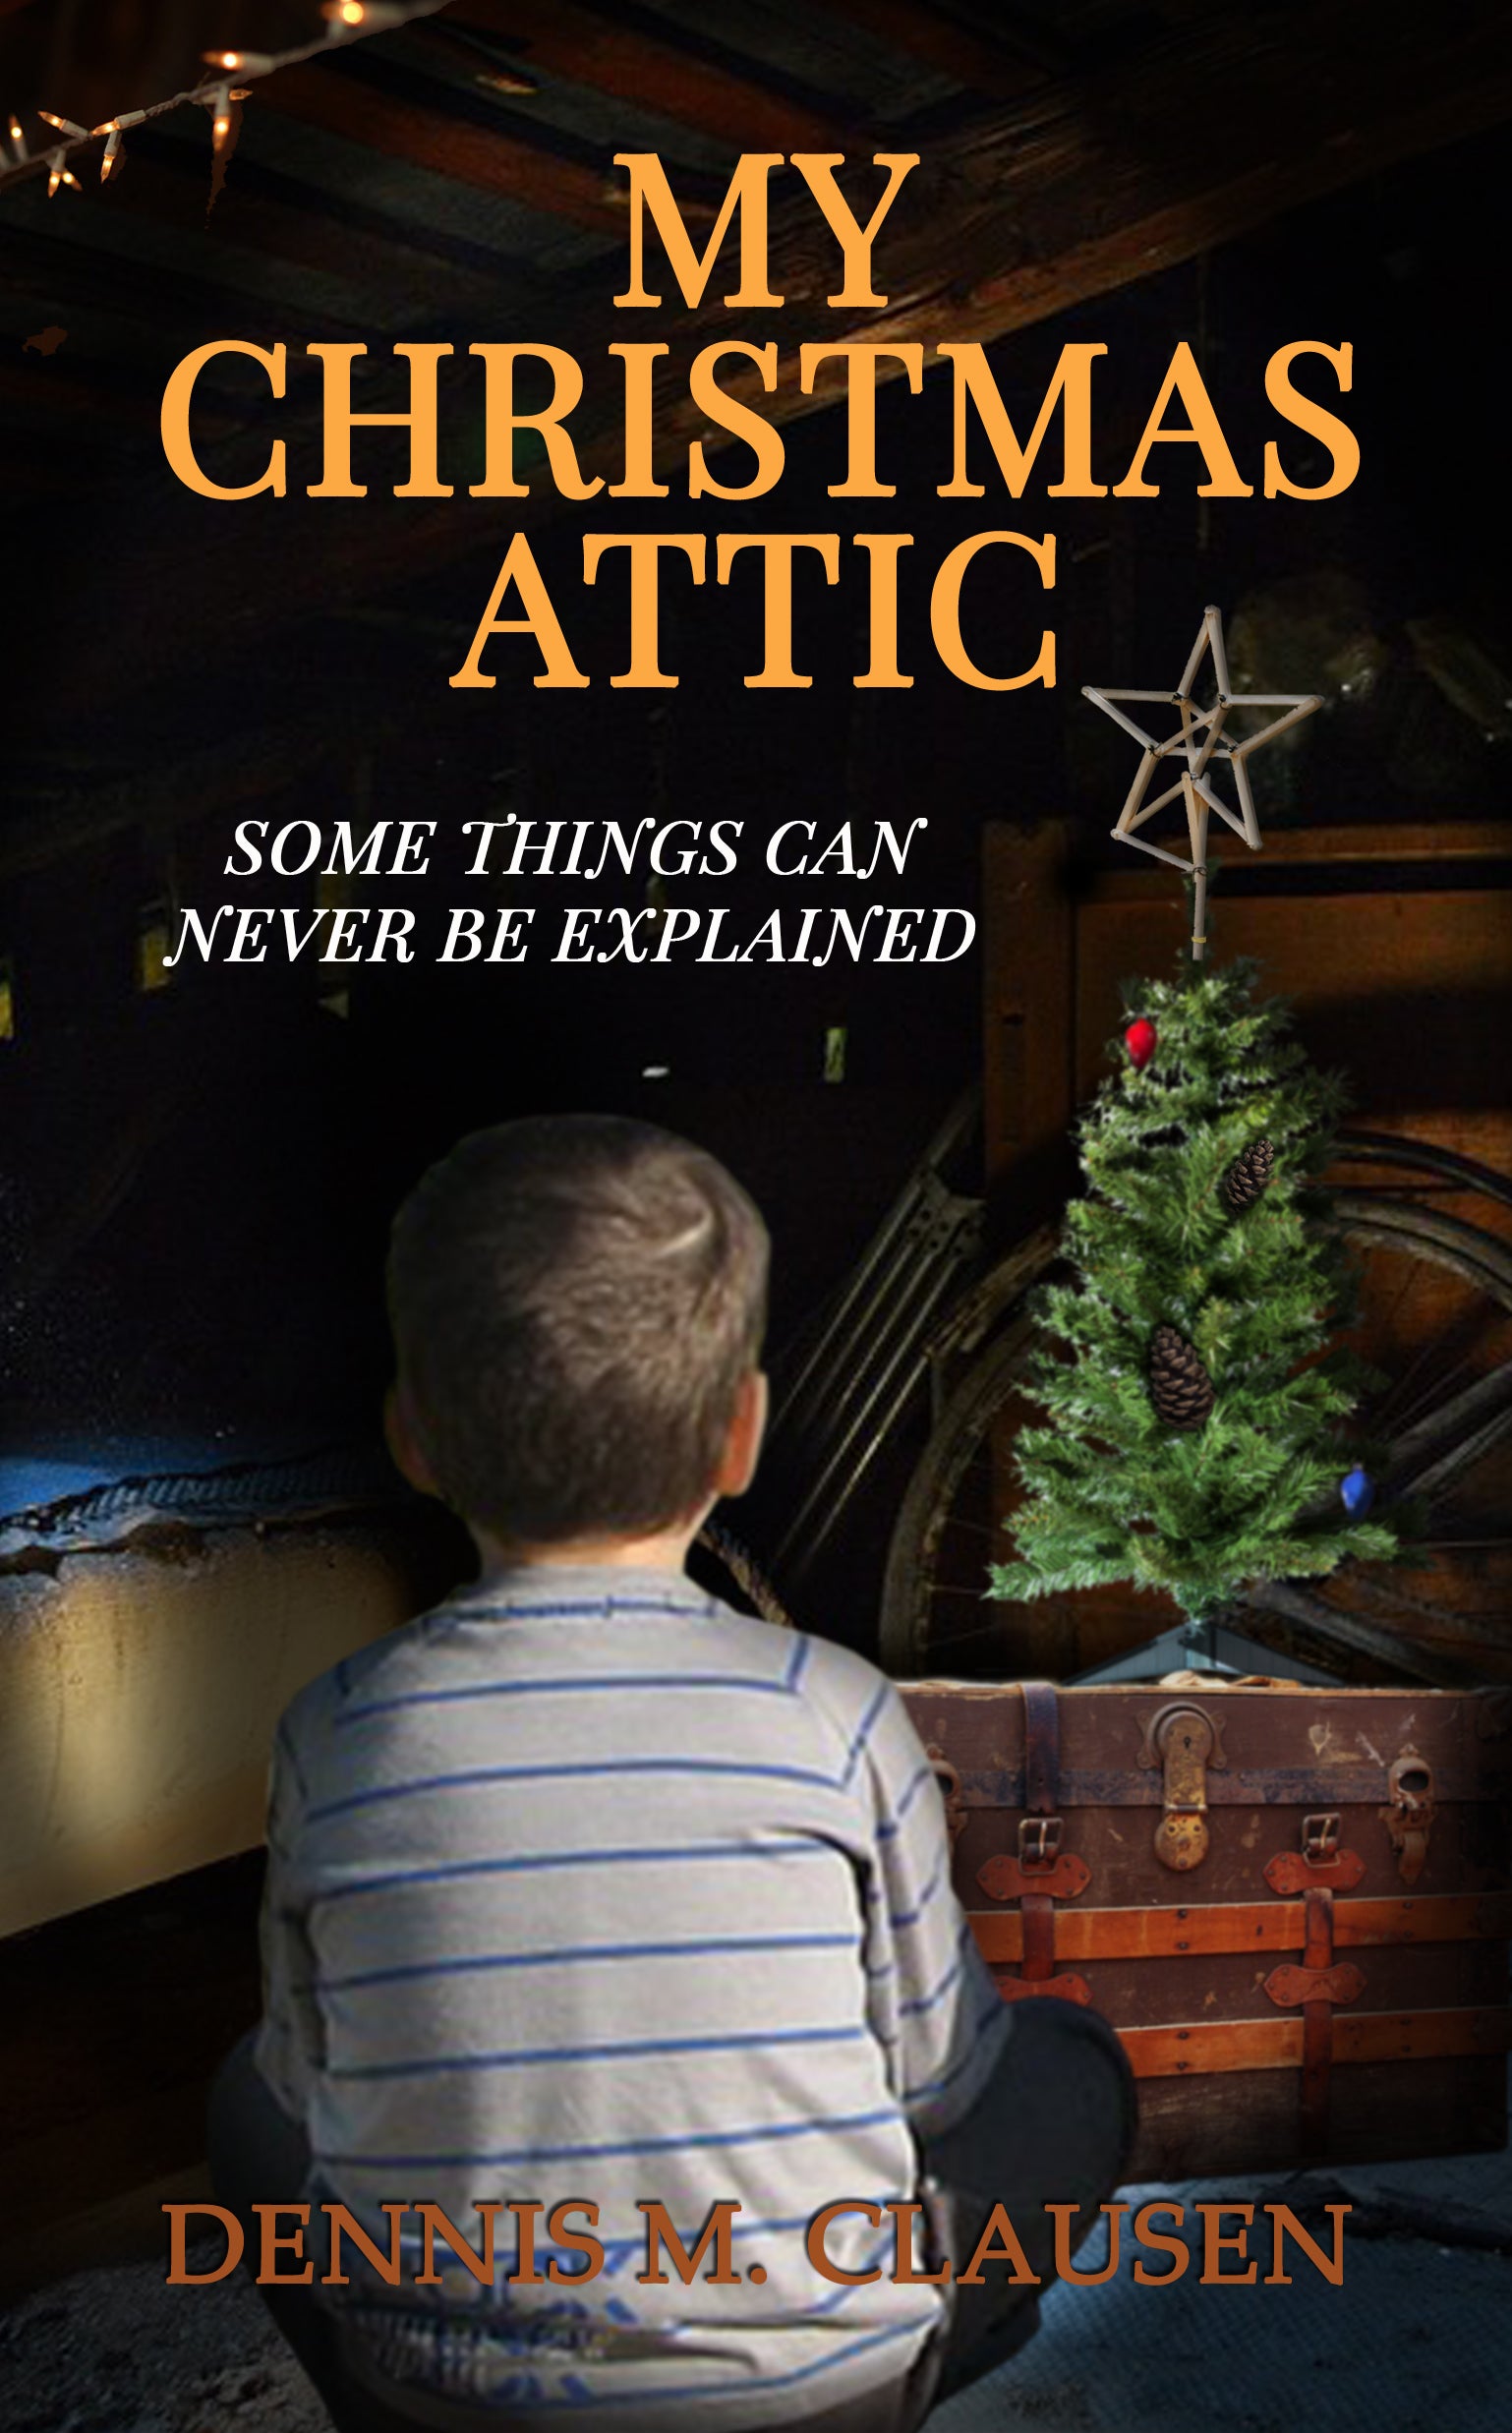 Dennis Clausen’s “My Christmas Attic” is the Brown Posey Press bestseller for December